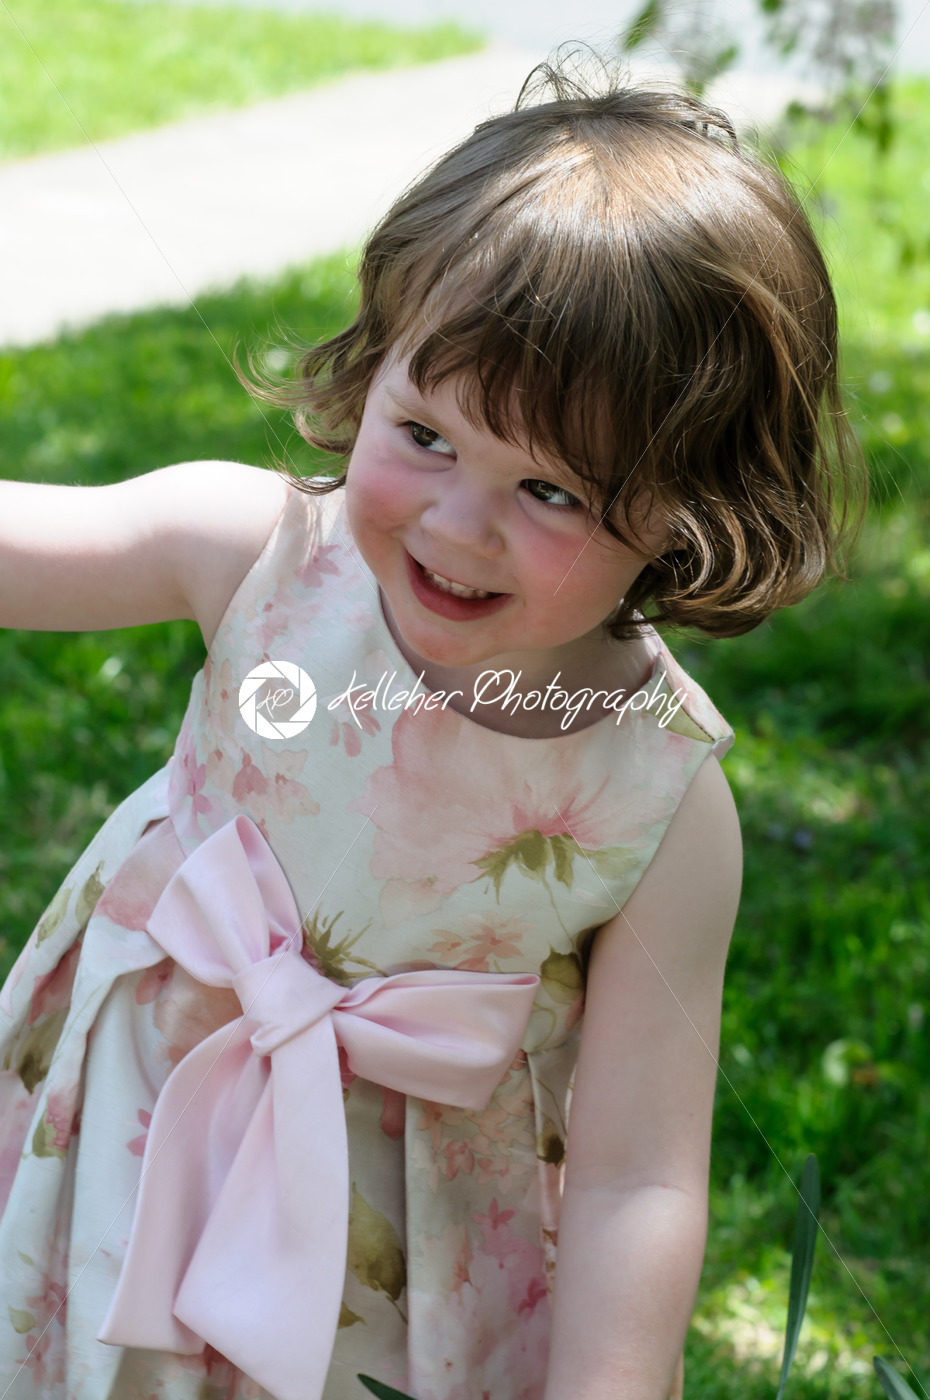 Portrait of a cute little girl smiling outside - Kelleher Photography Store